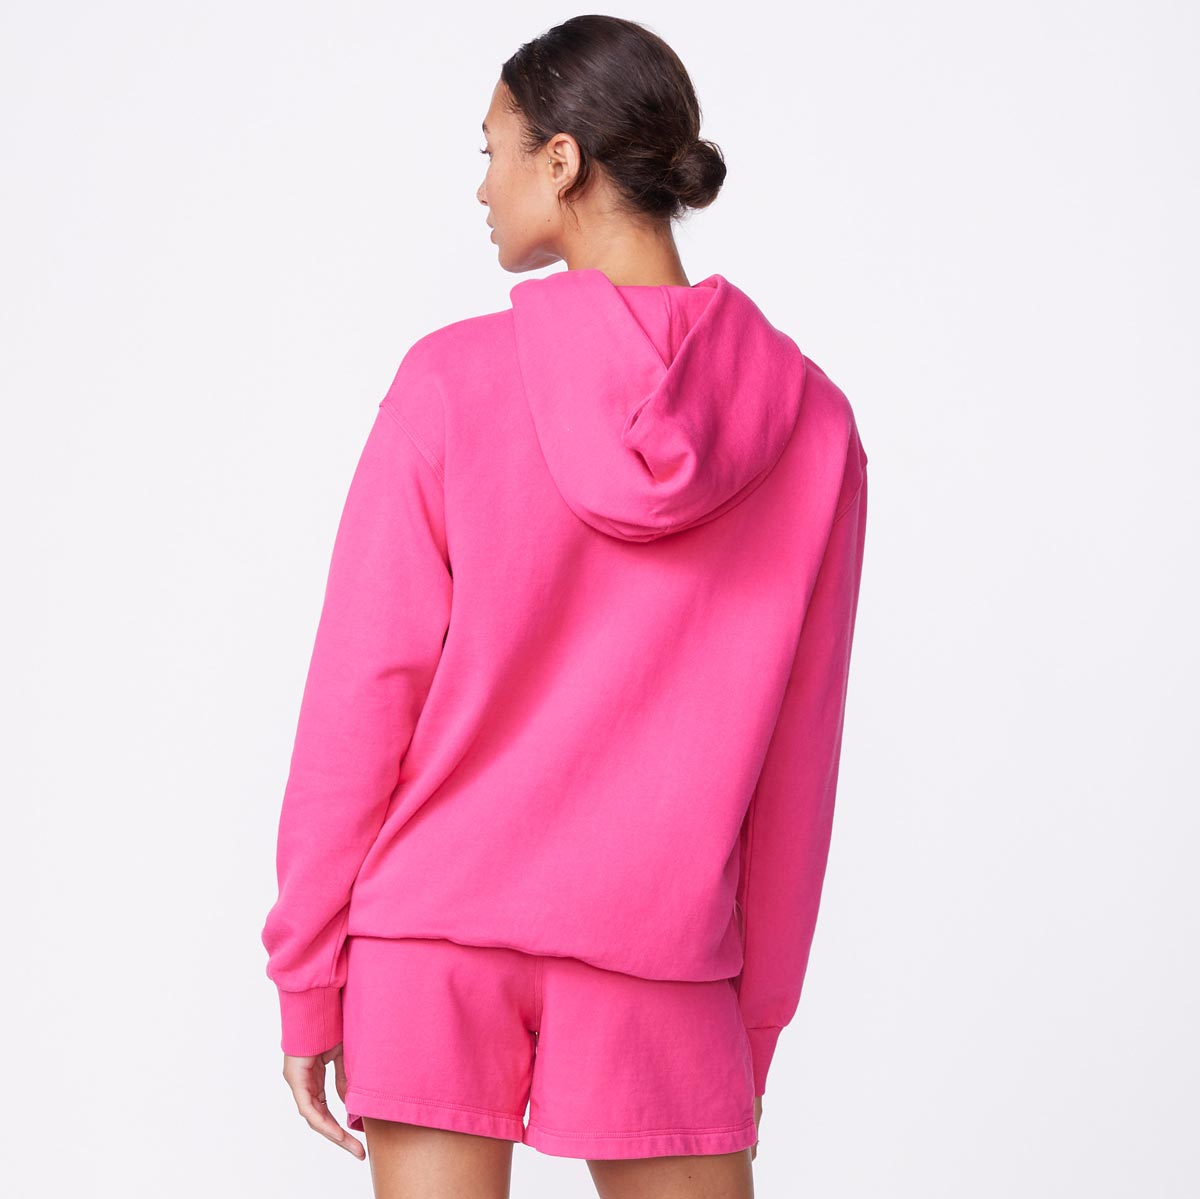 Back view of model wearing the 90's classic hoody in raspberry.